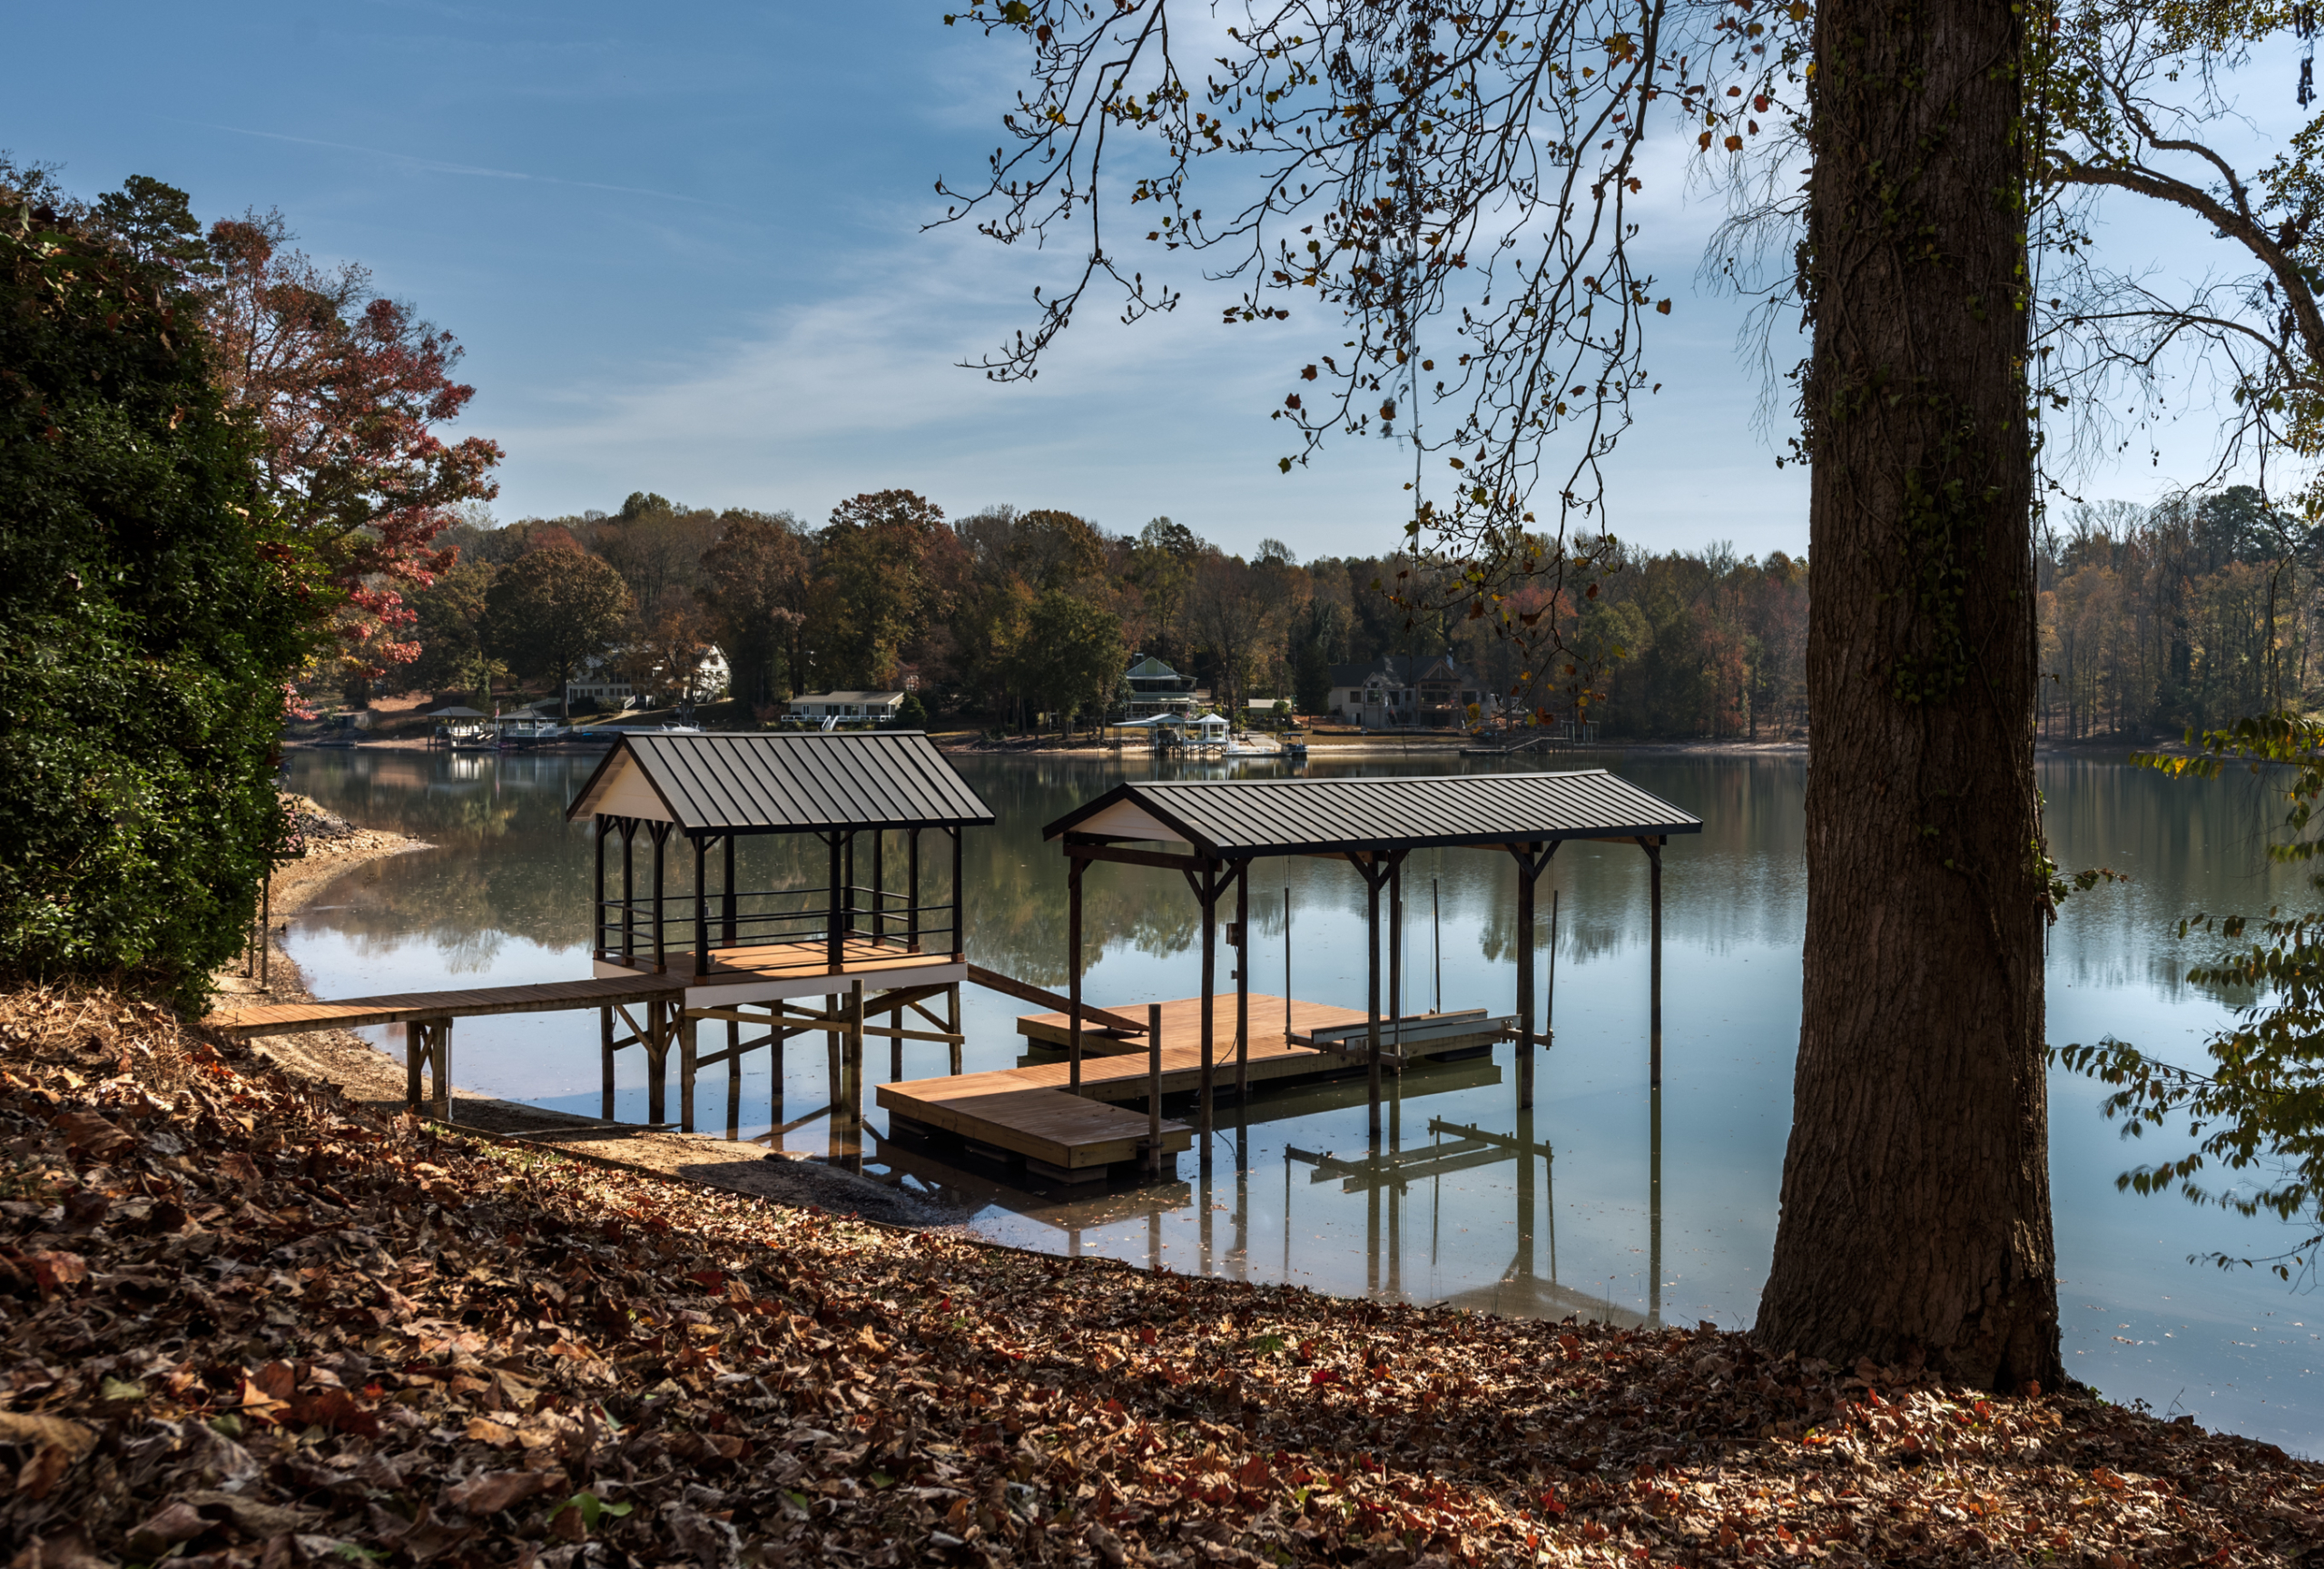 Lake Wylie Oversize grandfathered dock with boat lift included; cumaru decking and metal roof